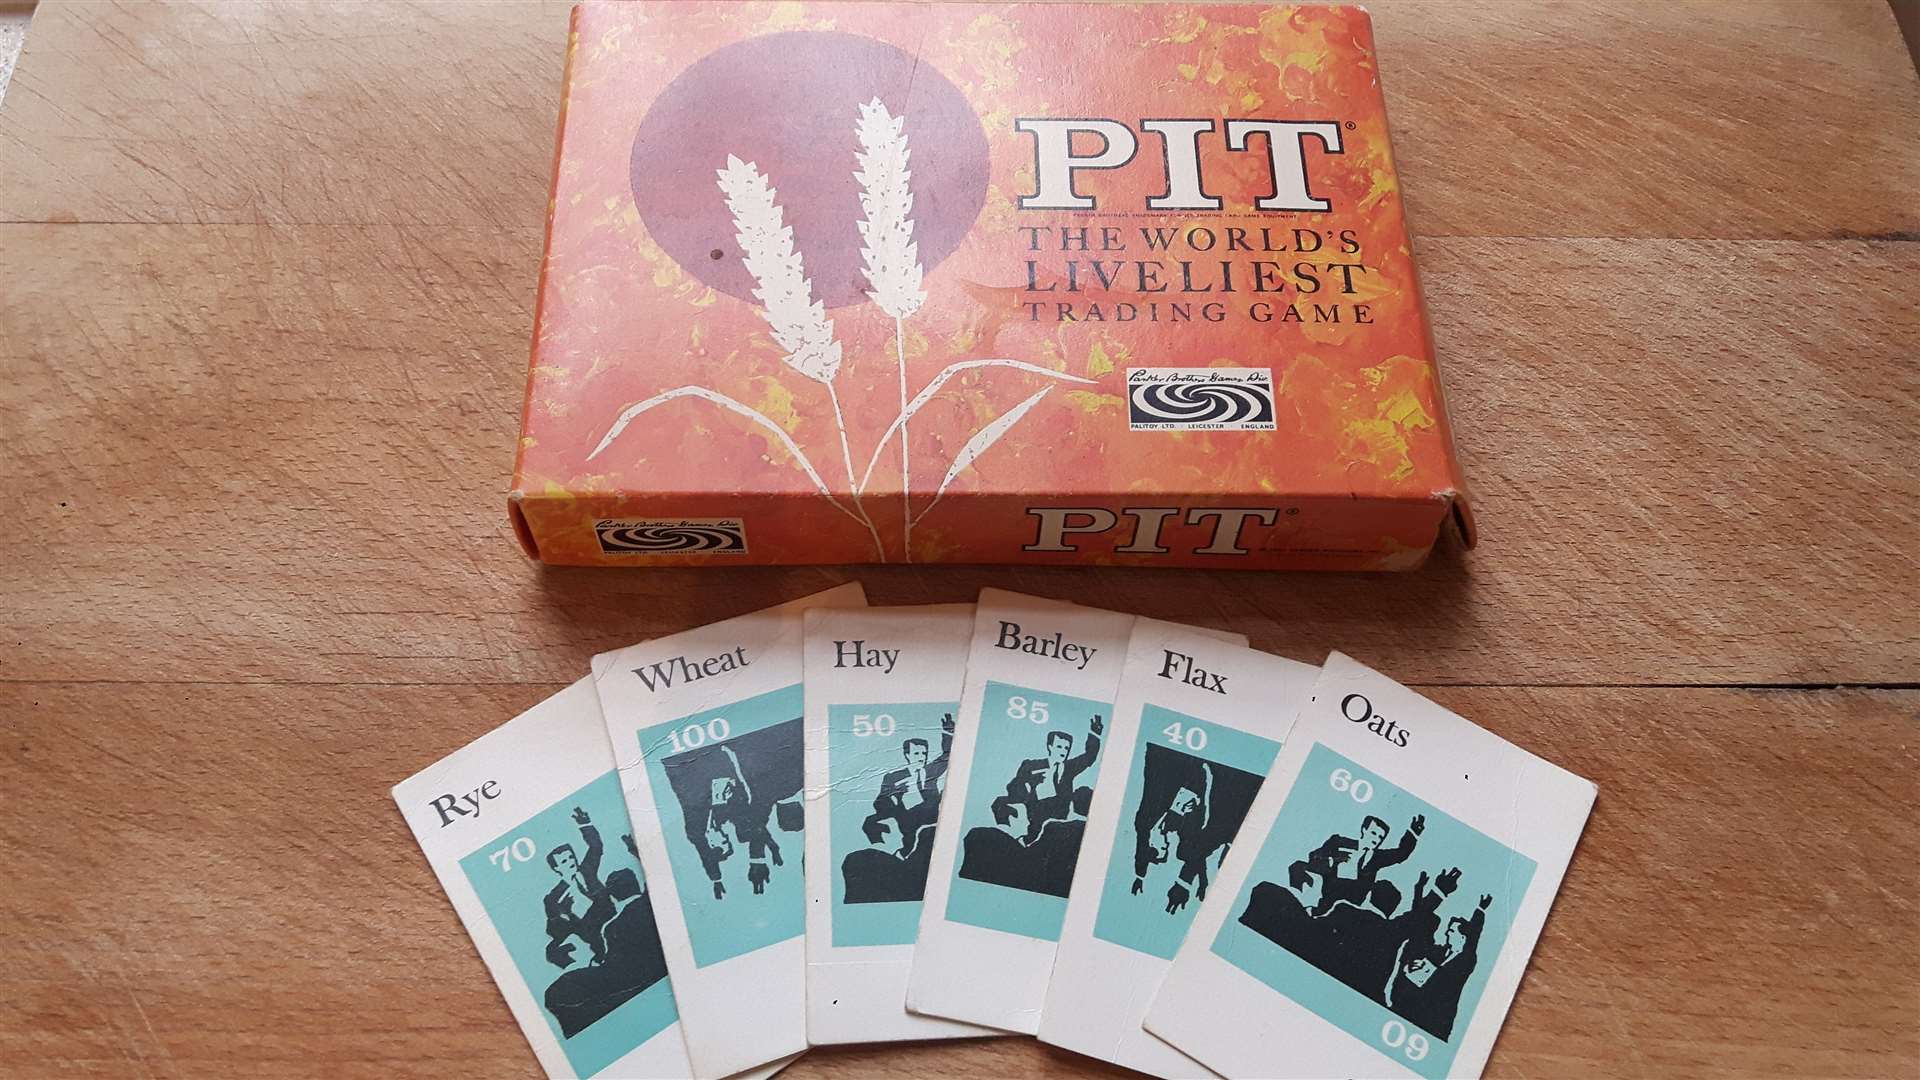 The Pit trading game from 1964